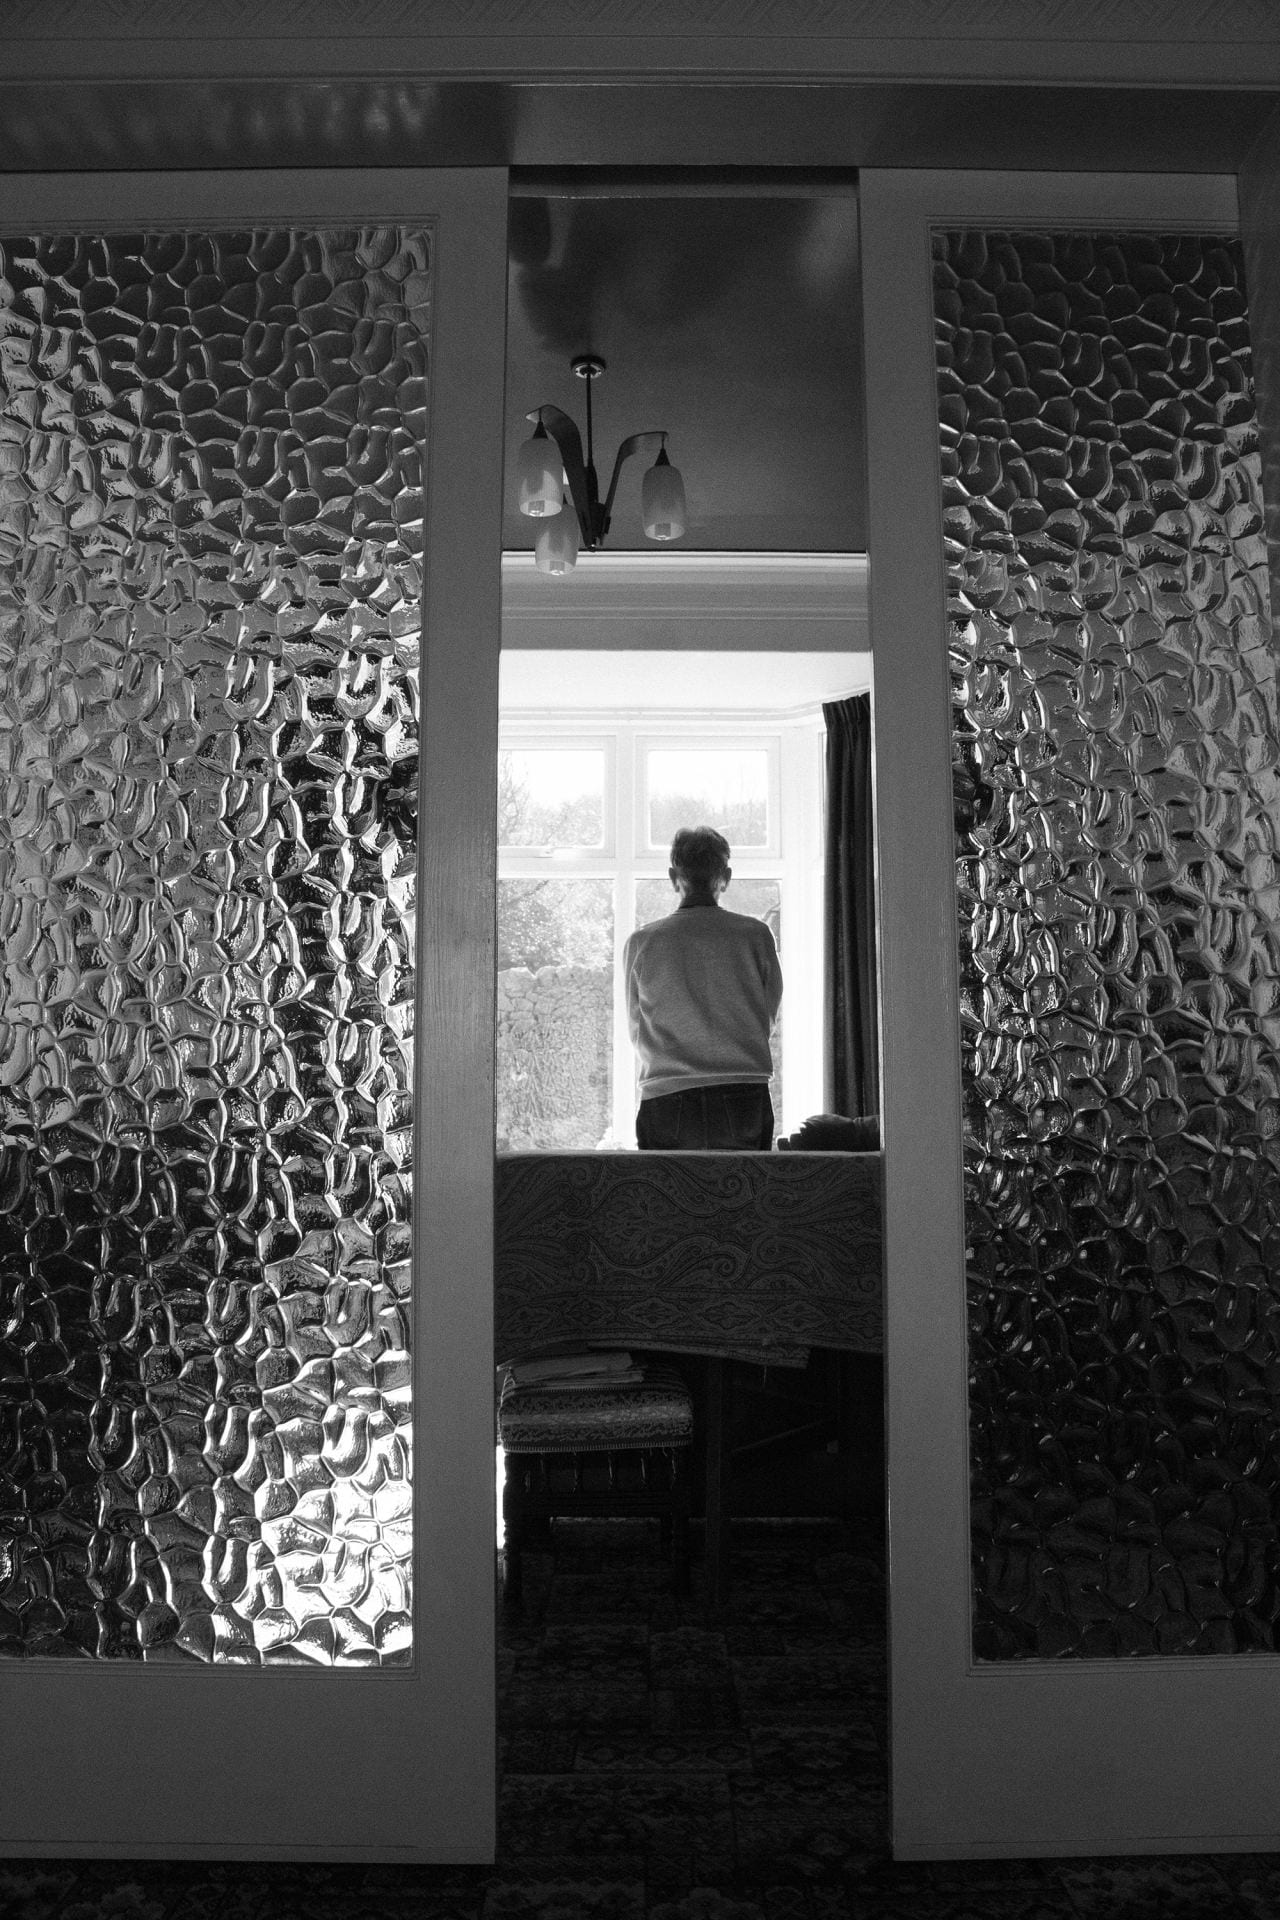 Black and white photograph of man standing by a window.